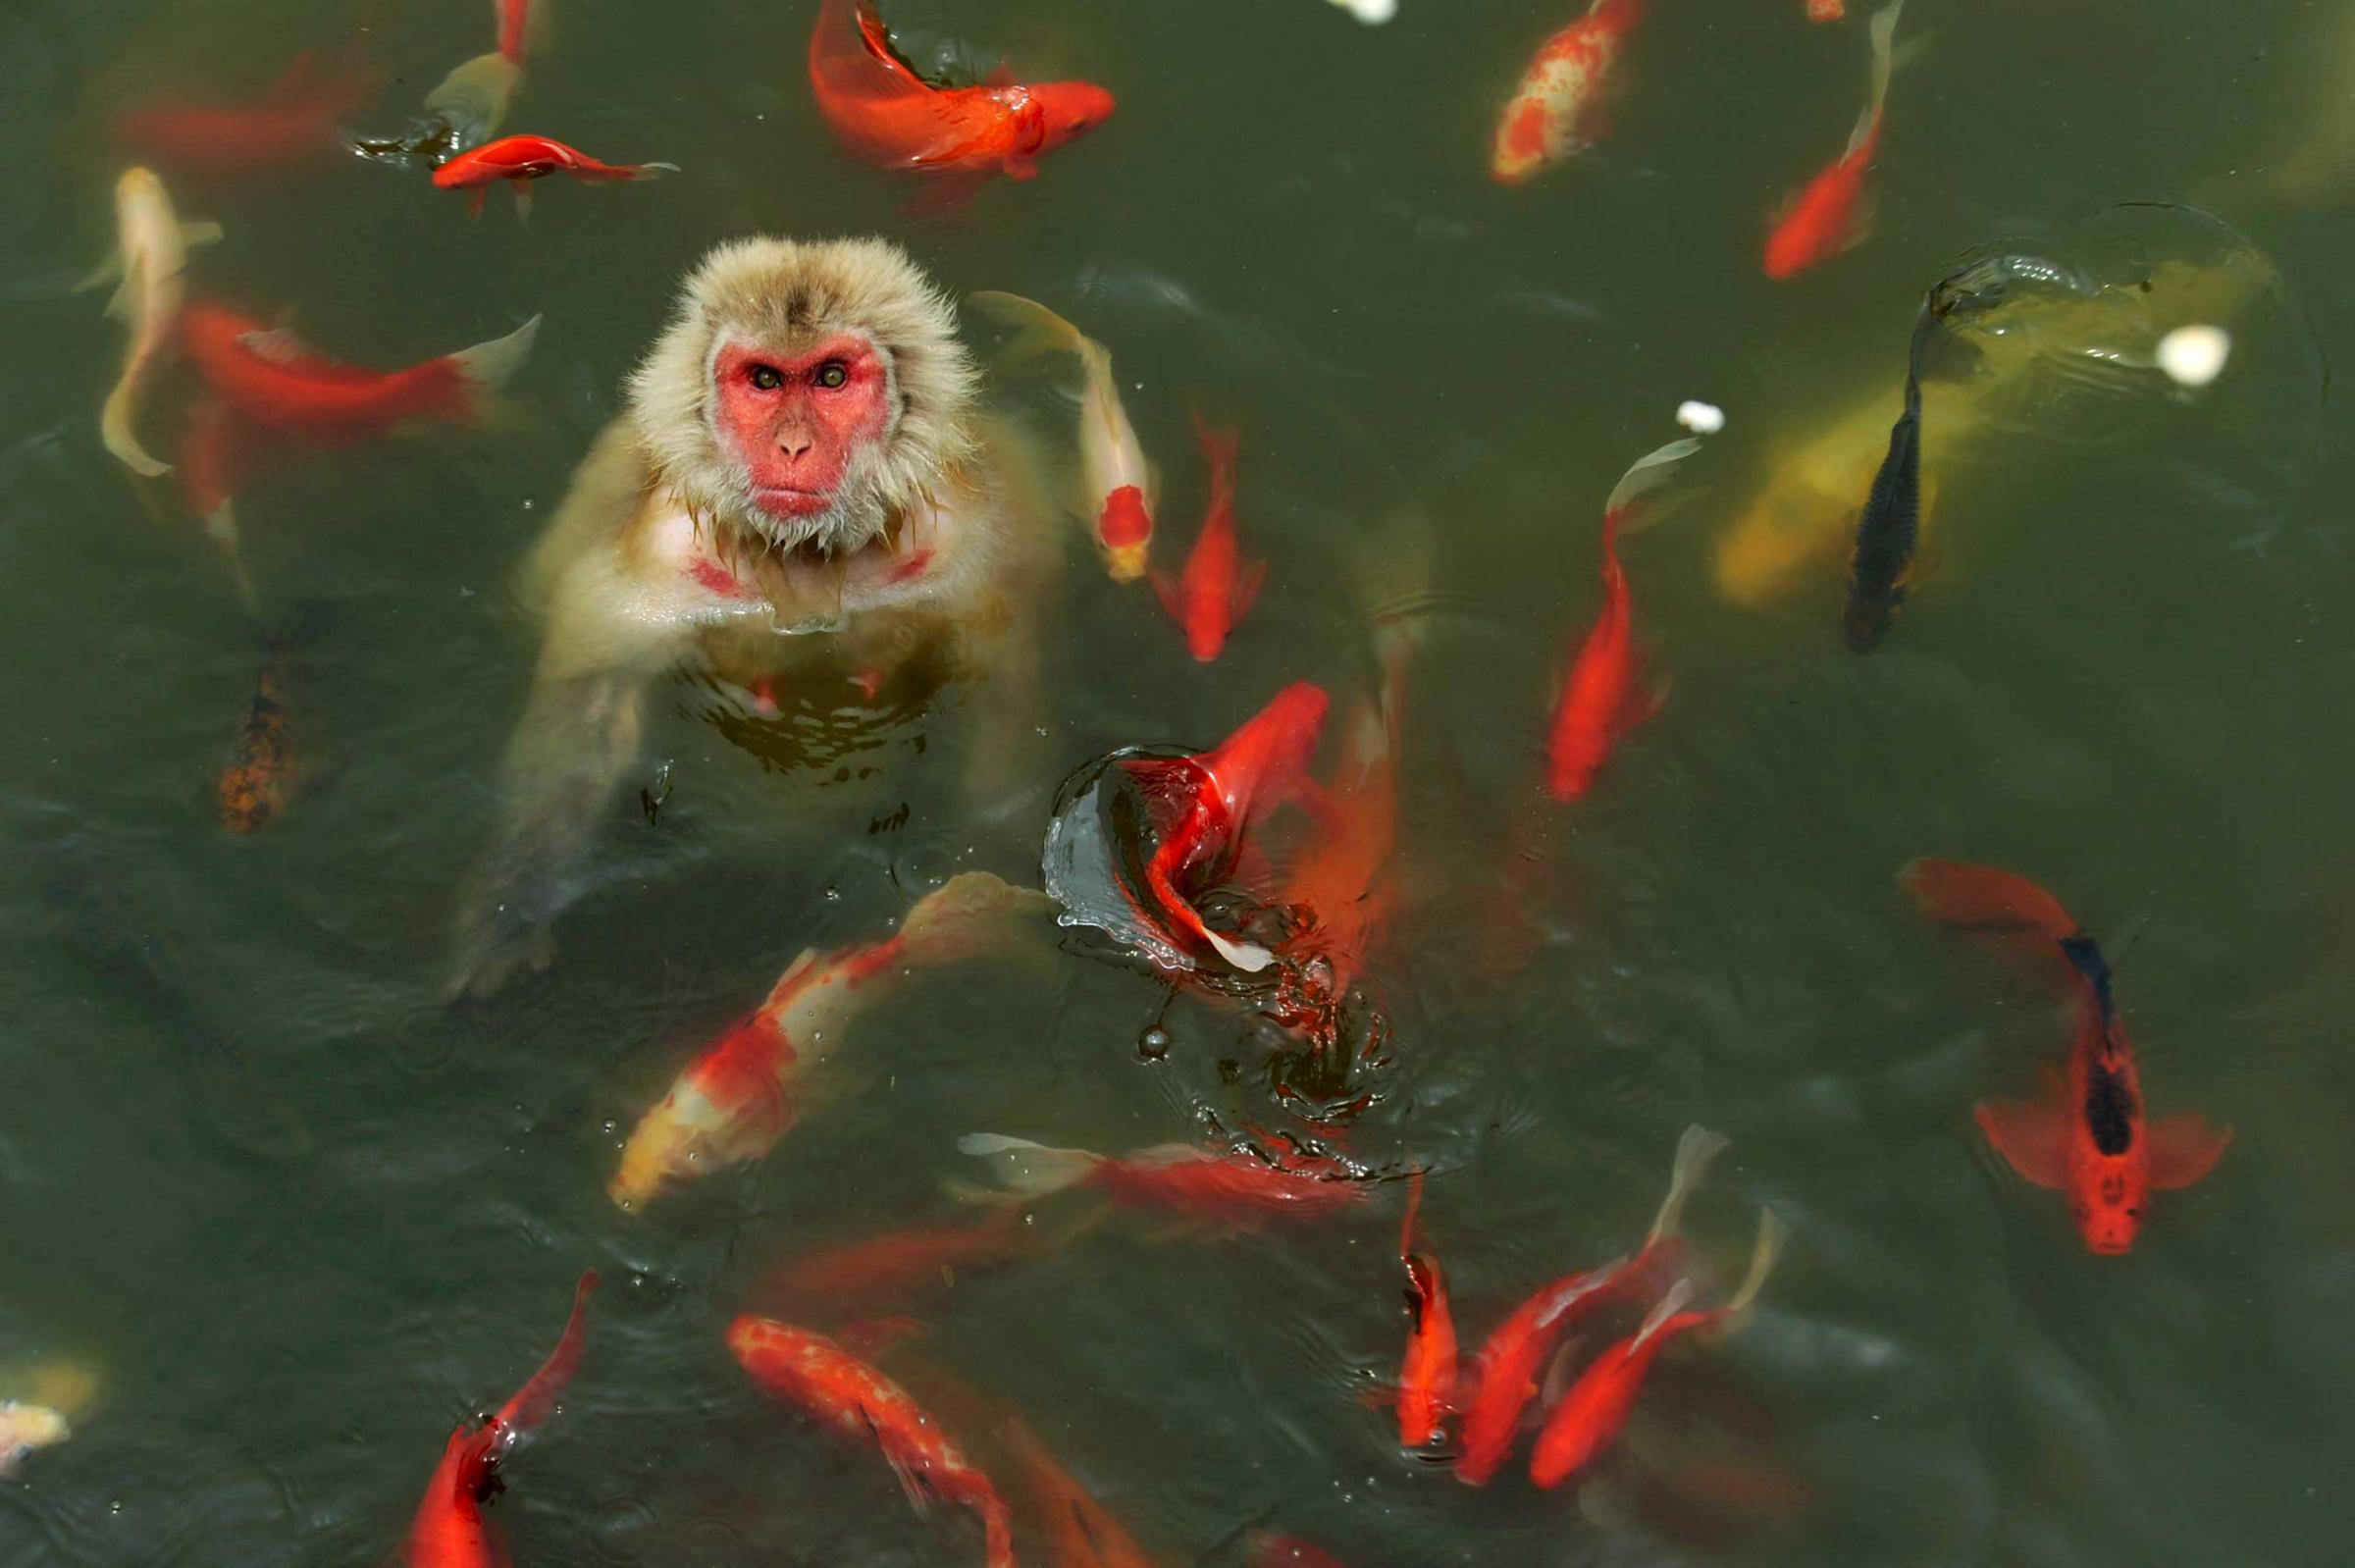 A monkey plays in a pond surrounded by carps at a wildlife park in Hefei, Anhui province